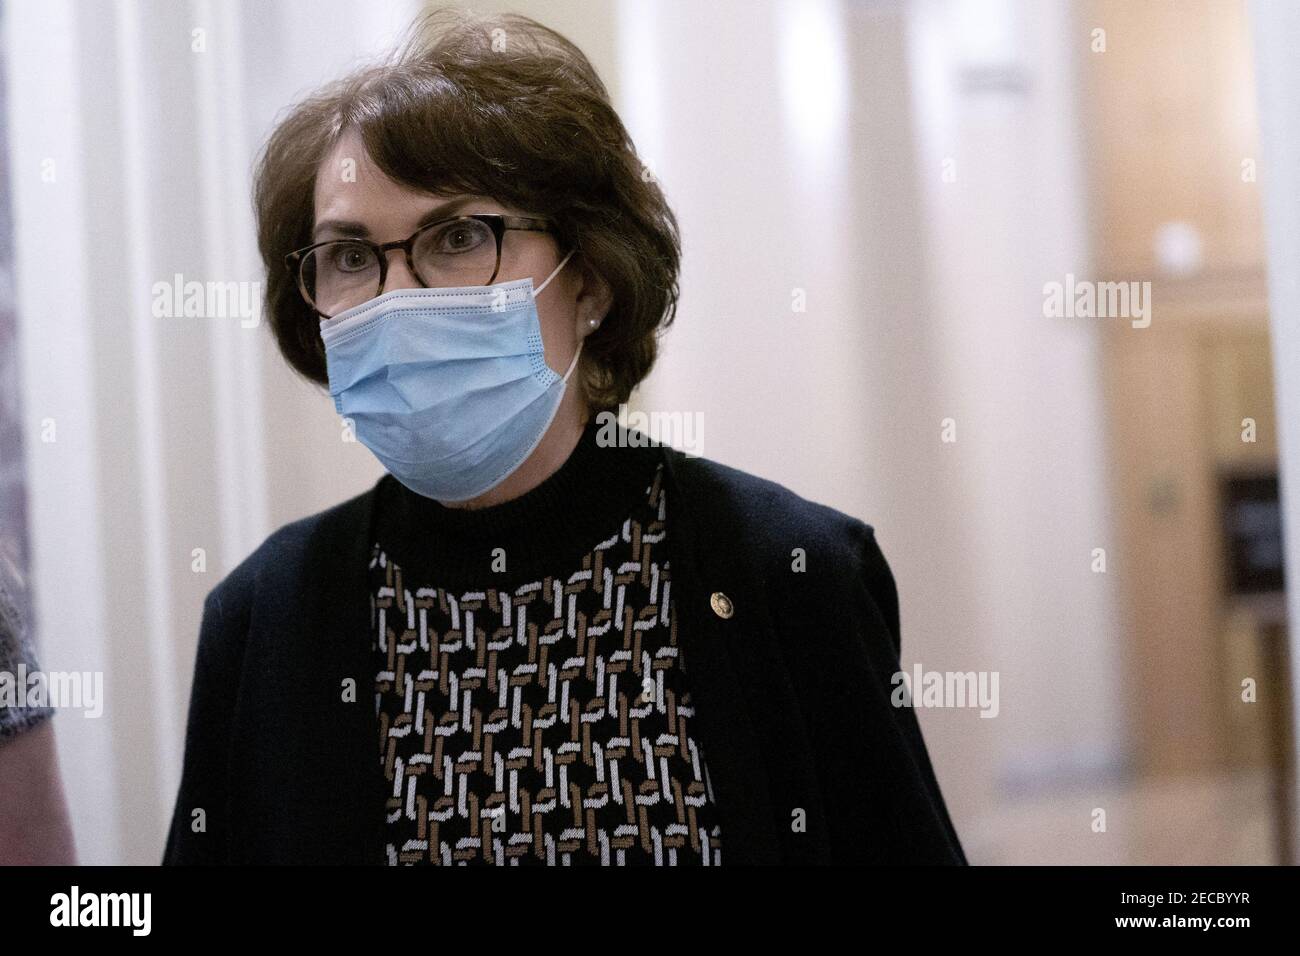 Senator Jacky Rosen, a Democrat from Nevada, wears a protective mask while walking through the U.S. Capitol in Washington, D.C., U.S., on Saturday, Feb. 13, 2021. The Senate approved 55-45 a request to consider calling witnesses in the second impeachment trial of Donald Trump, a move that may extend the trial that was expected to end within hours. Photo by Stefani Reynolds/Pool/ABACAPRESS.COM Stock Photo